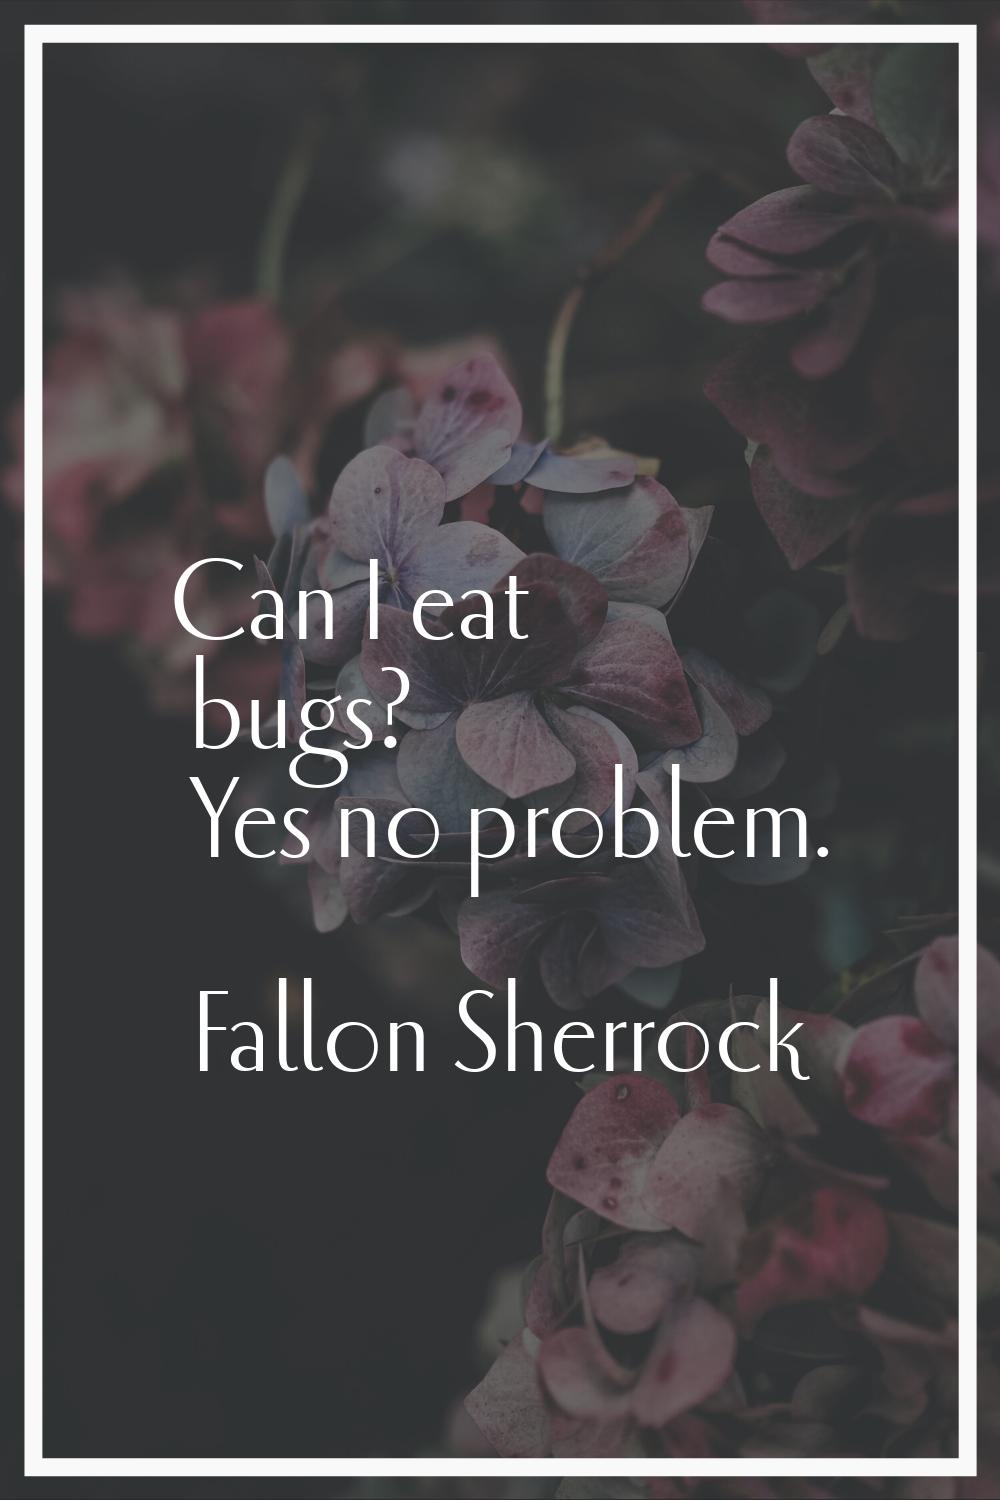 Can I eat bugs? Yes no problem.